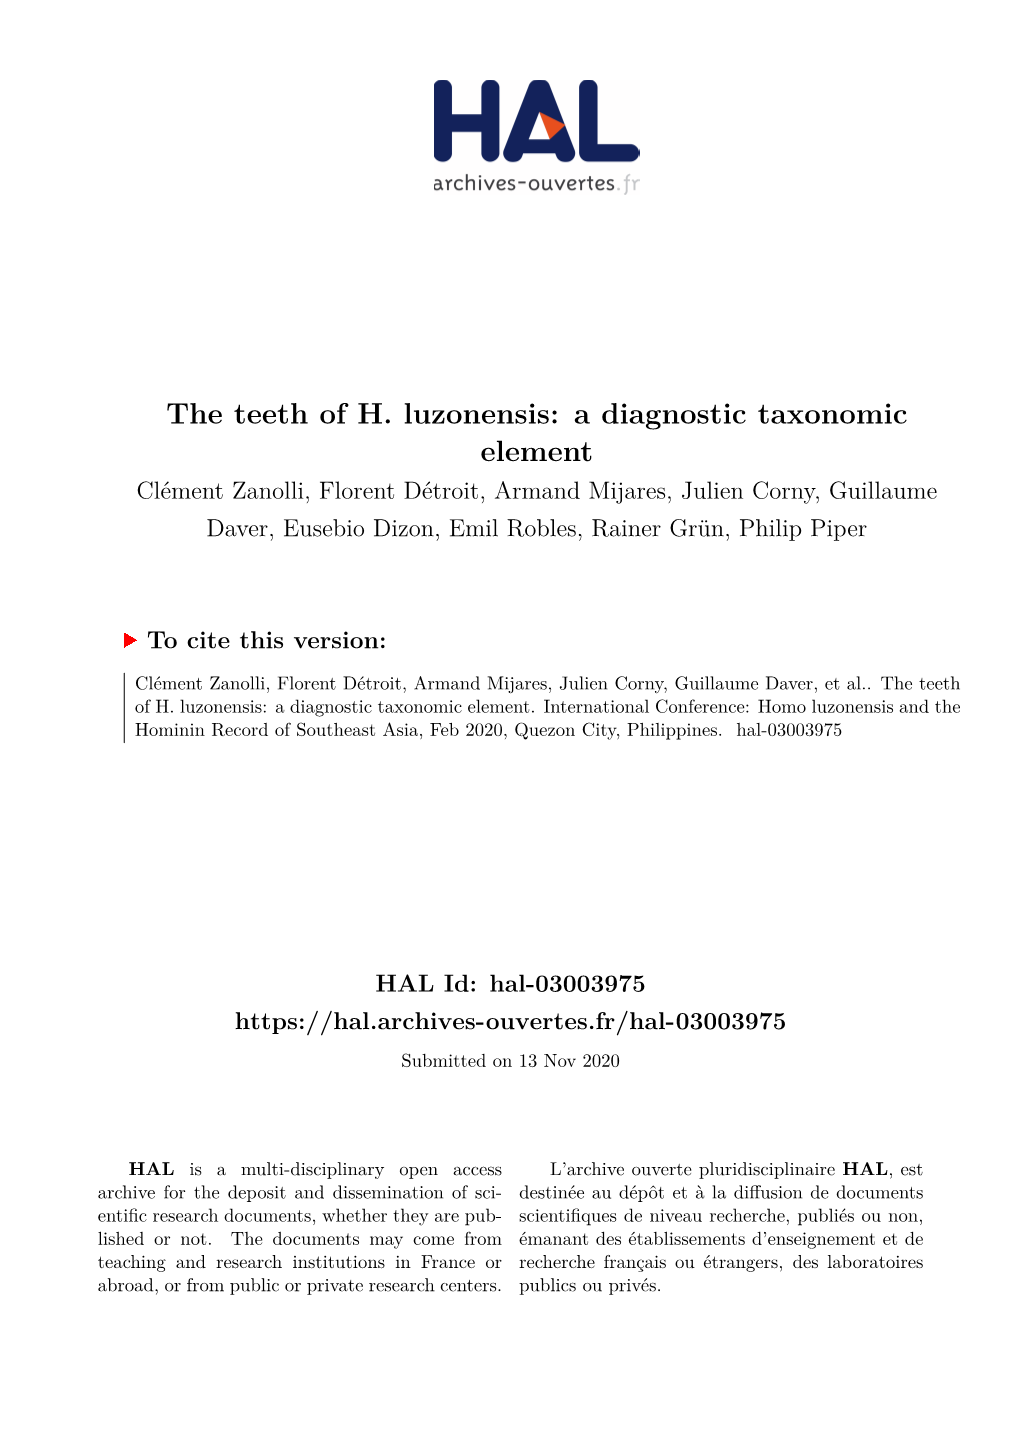 The Teeth of H. Luzonensis: a Diagnostic Taxonomic Element